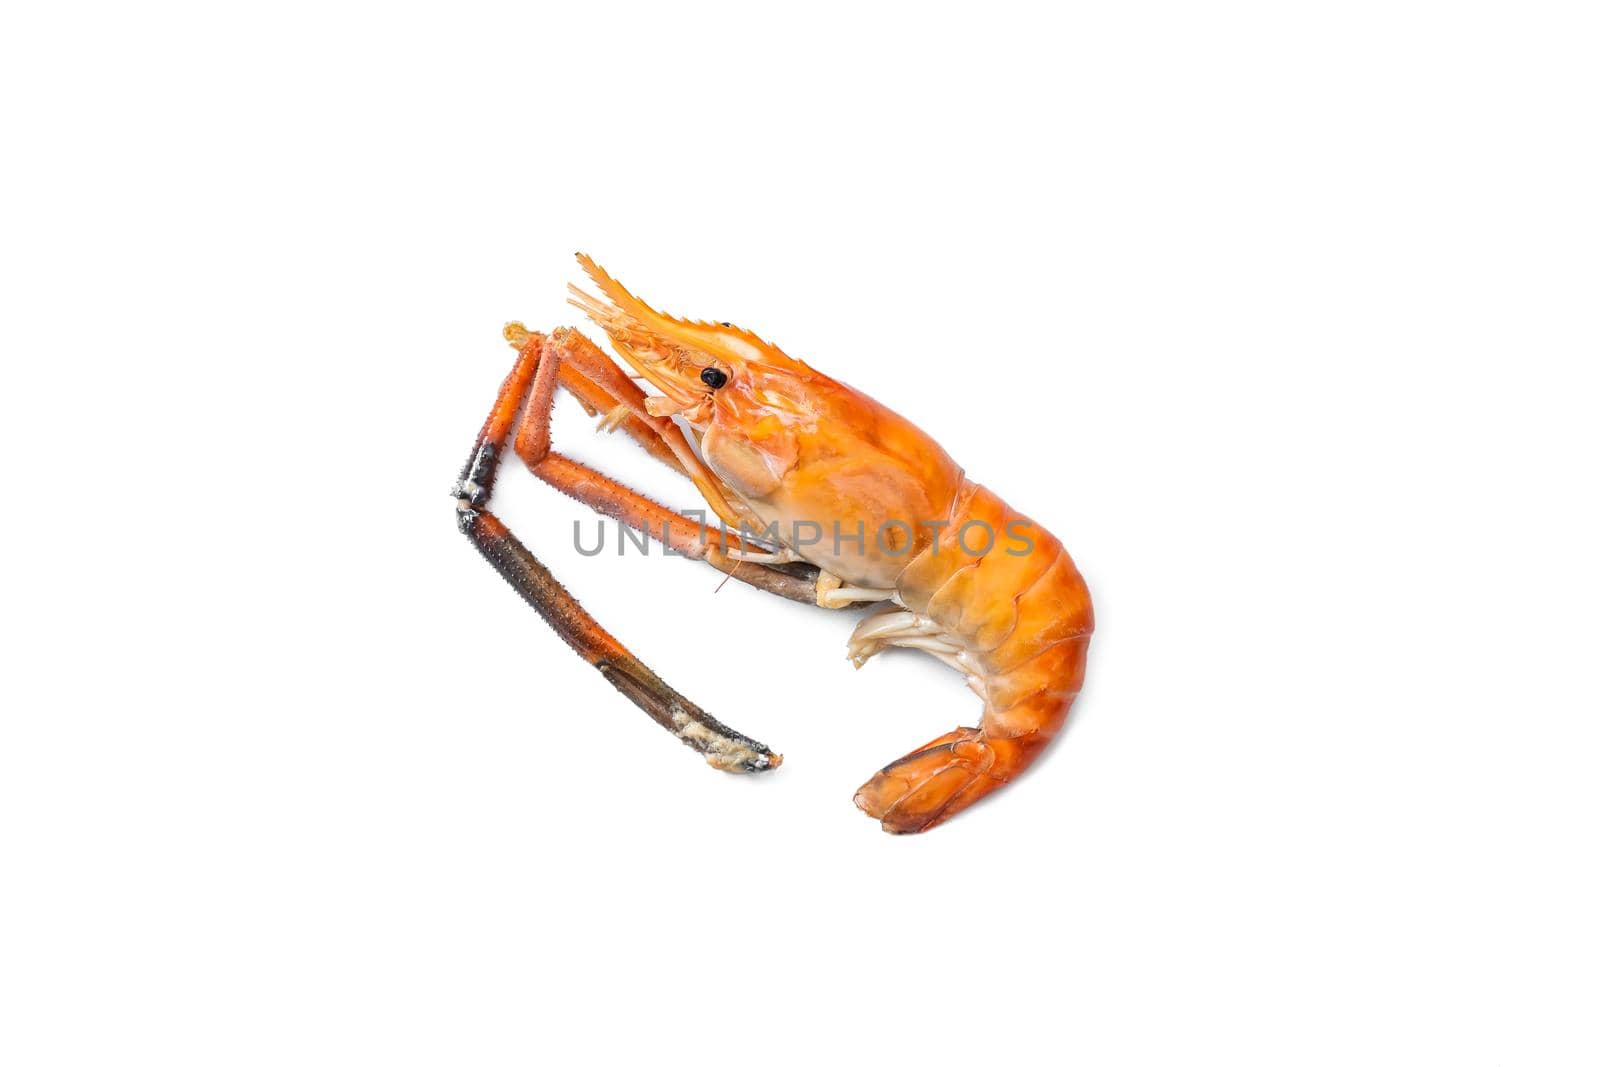 Grilled large river prawn are ready to eat isolated on white background.